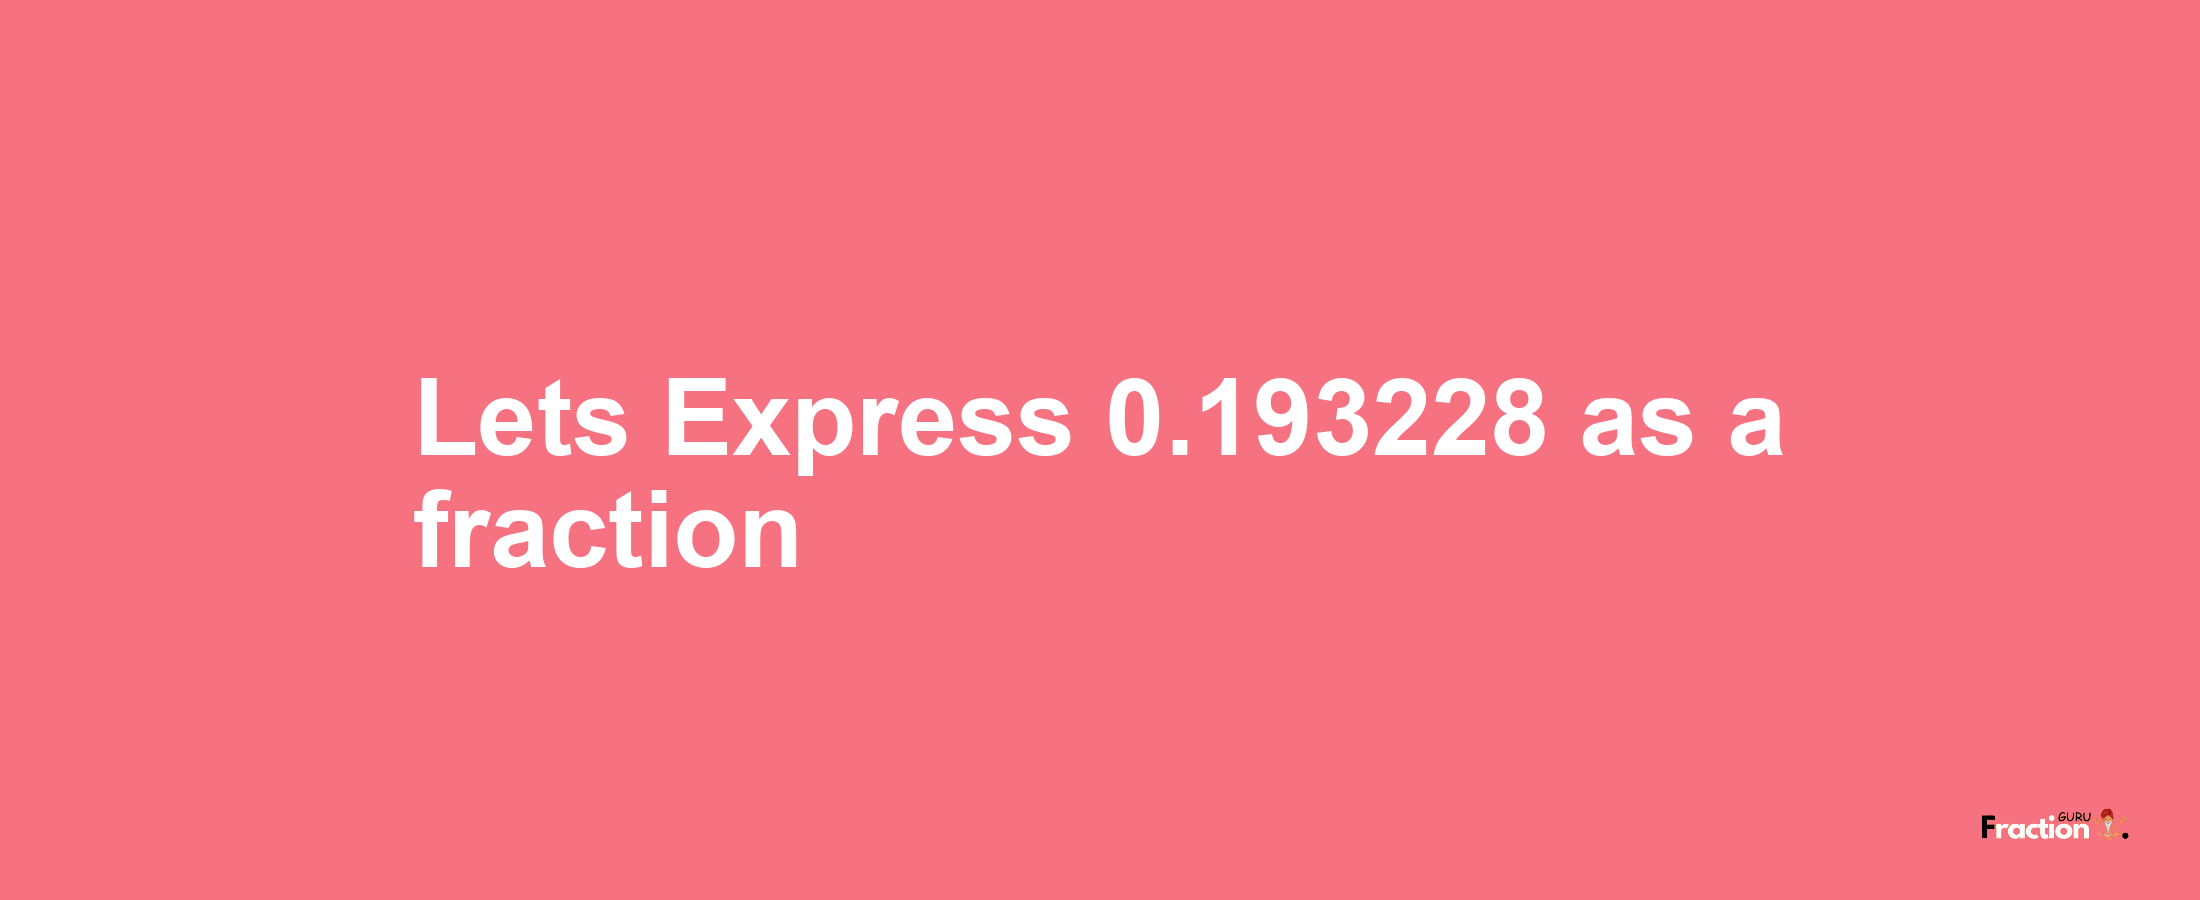 Lets Express 0.193228 as afraction